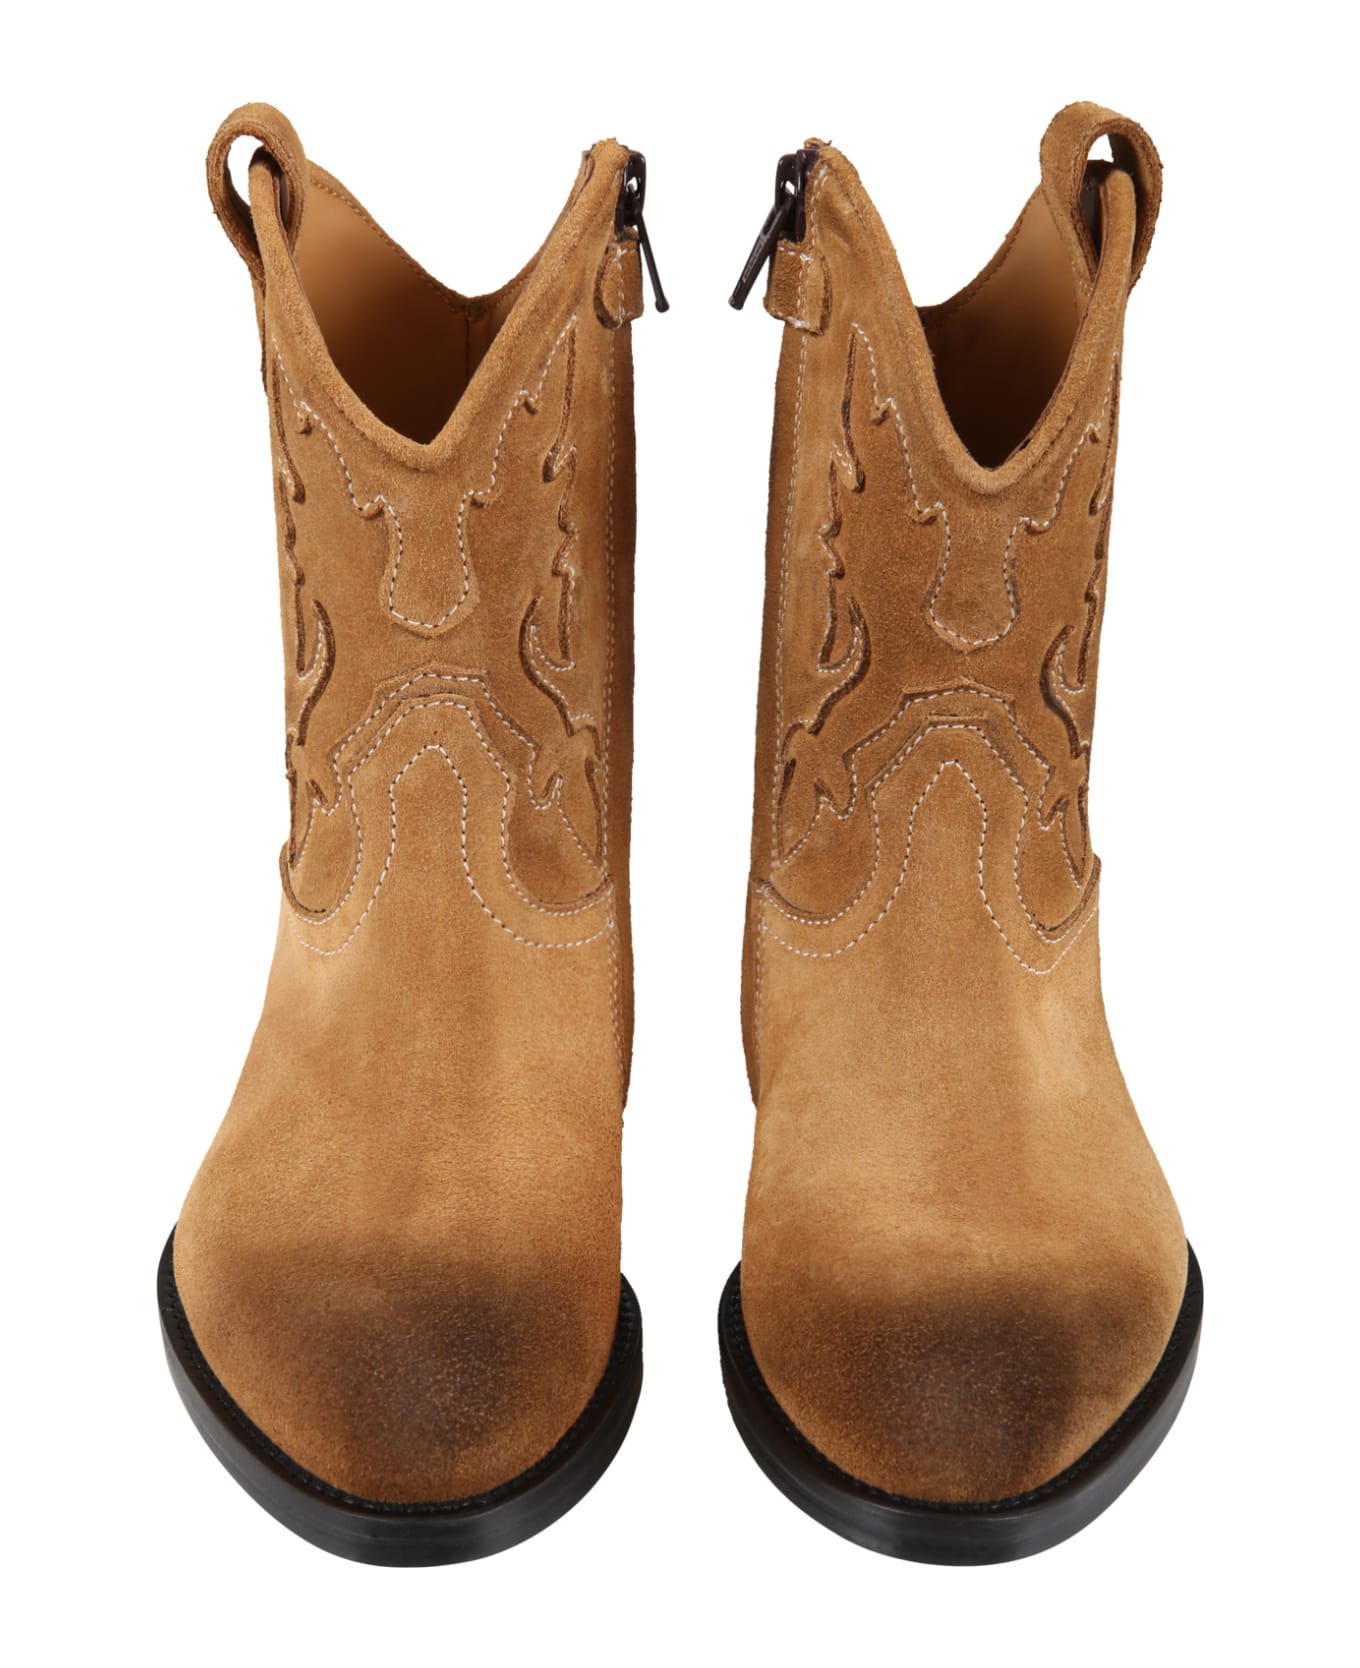 Gallucci Beige Boots For Kids - Brown